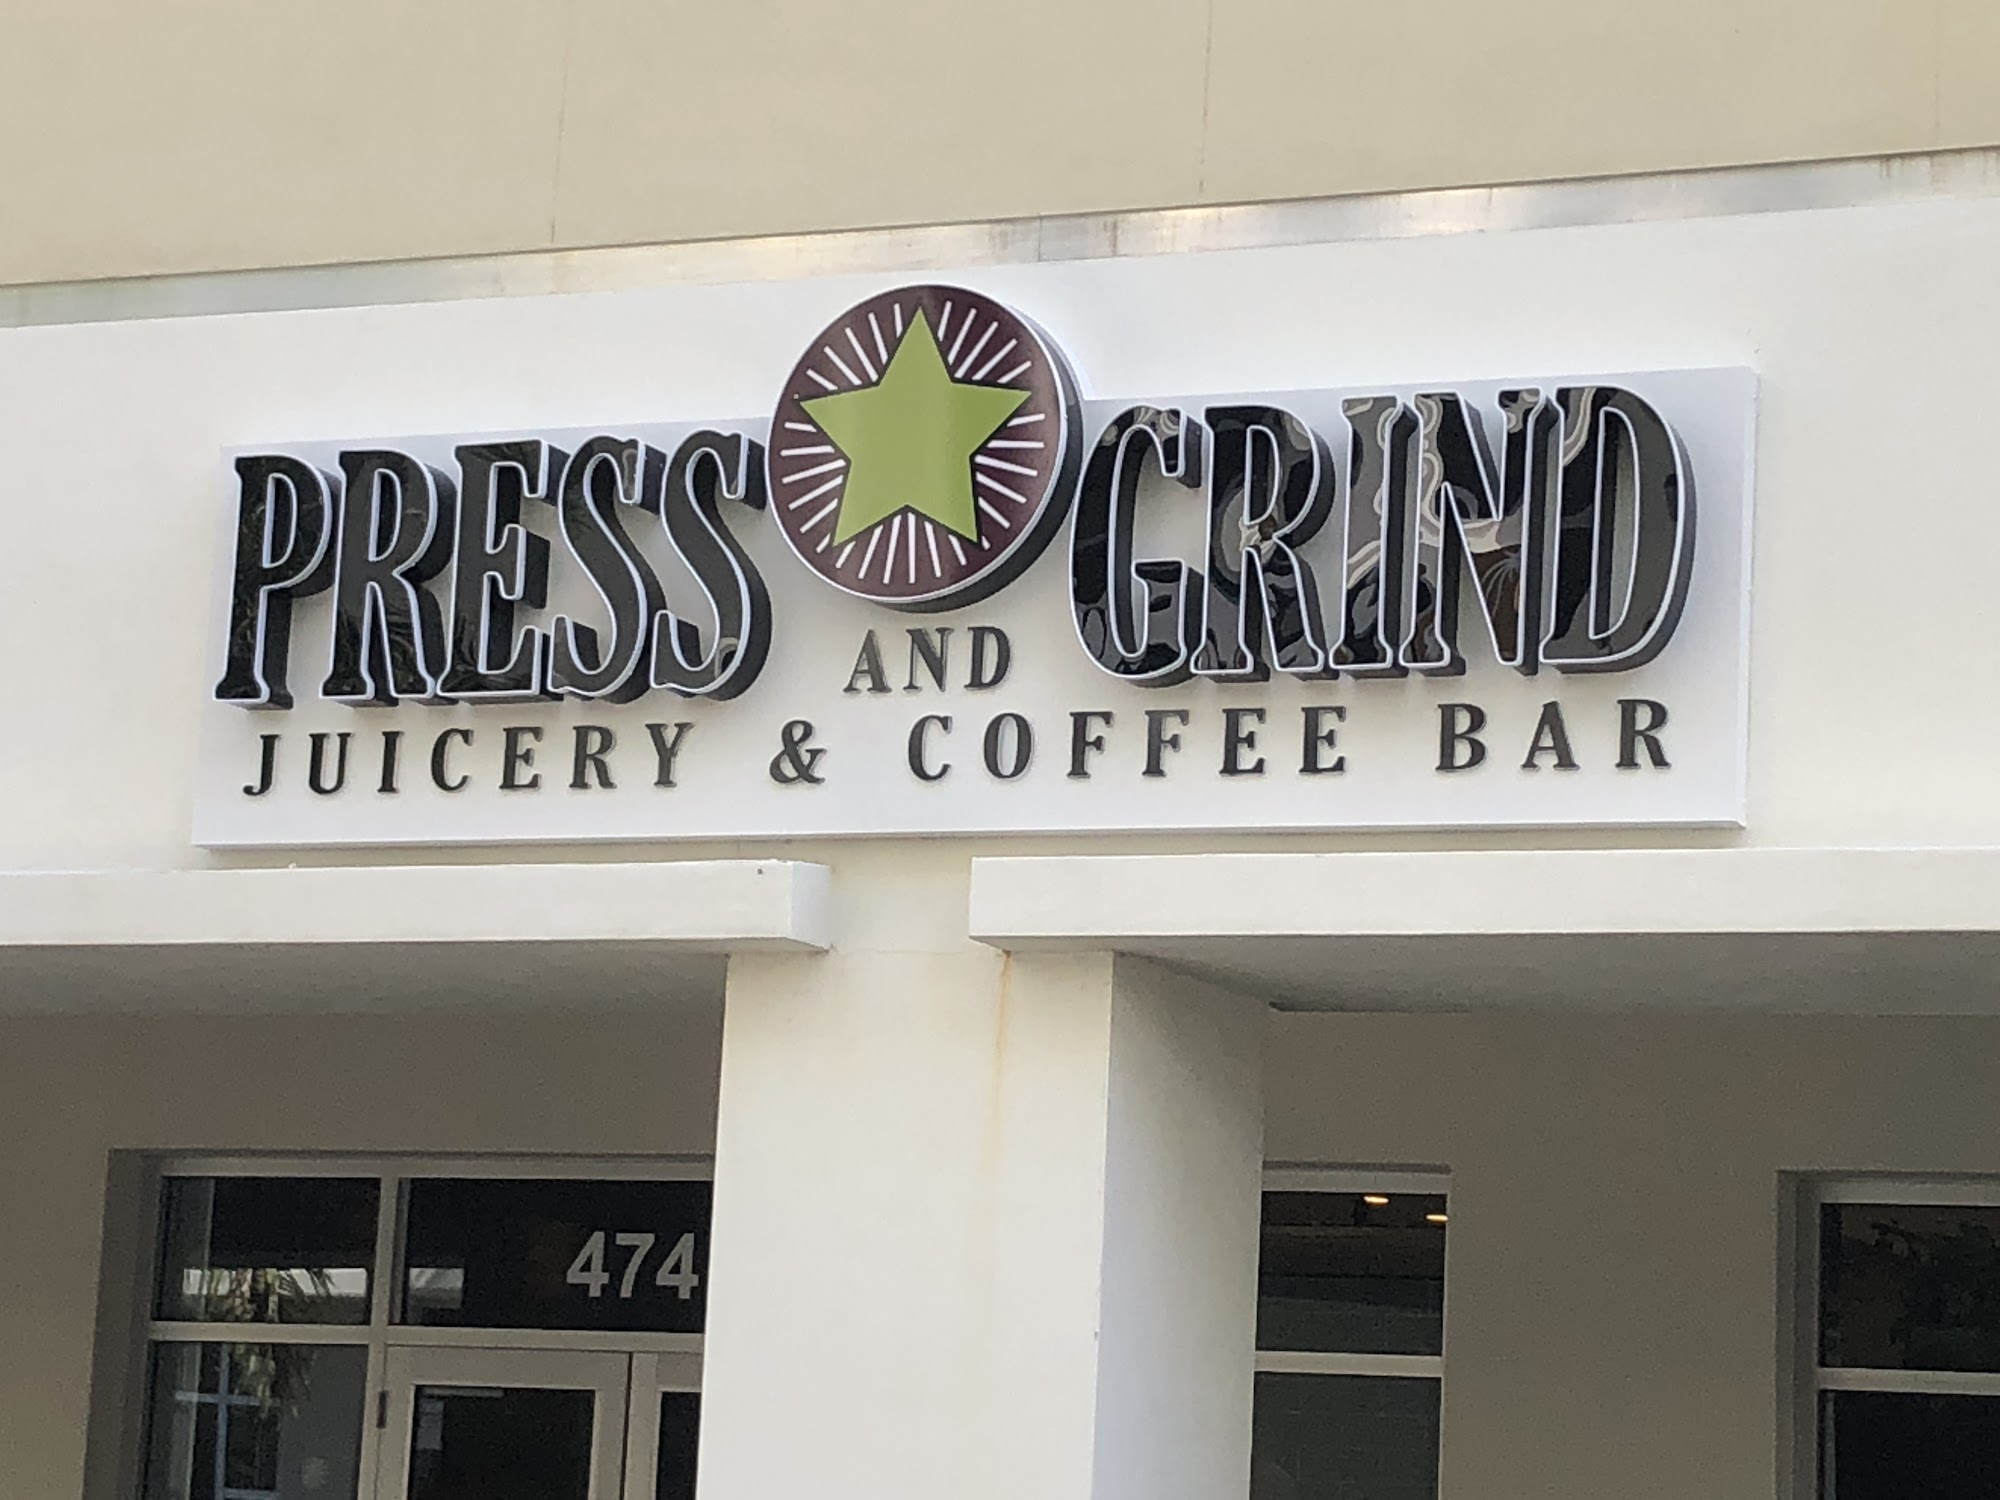 Press and Grind Cafe